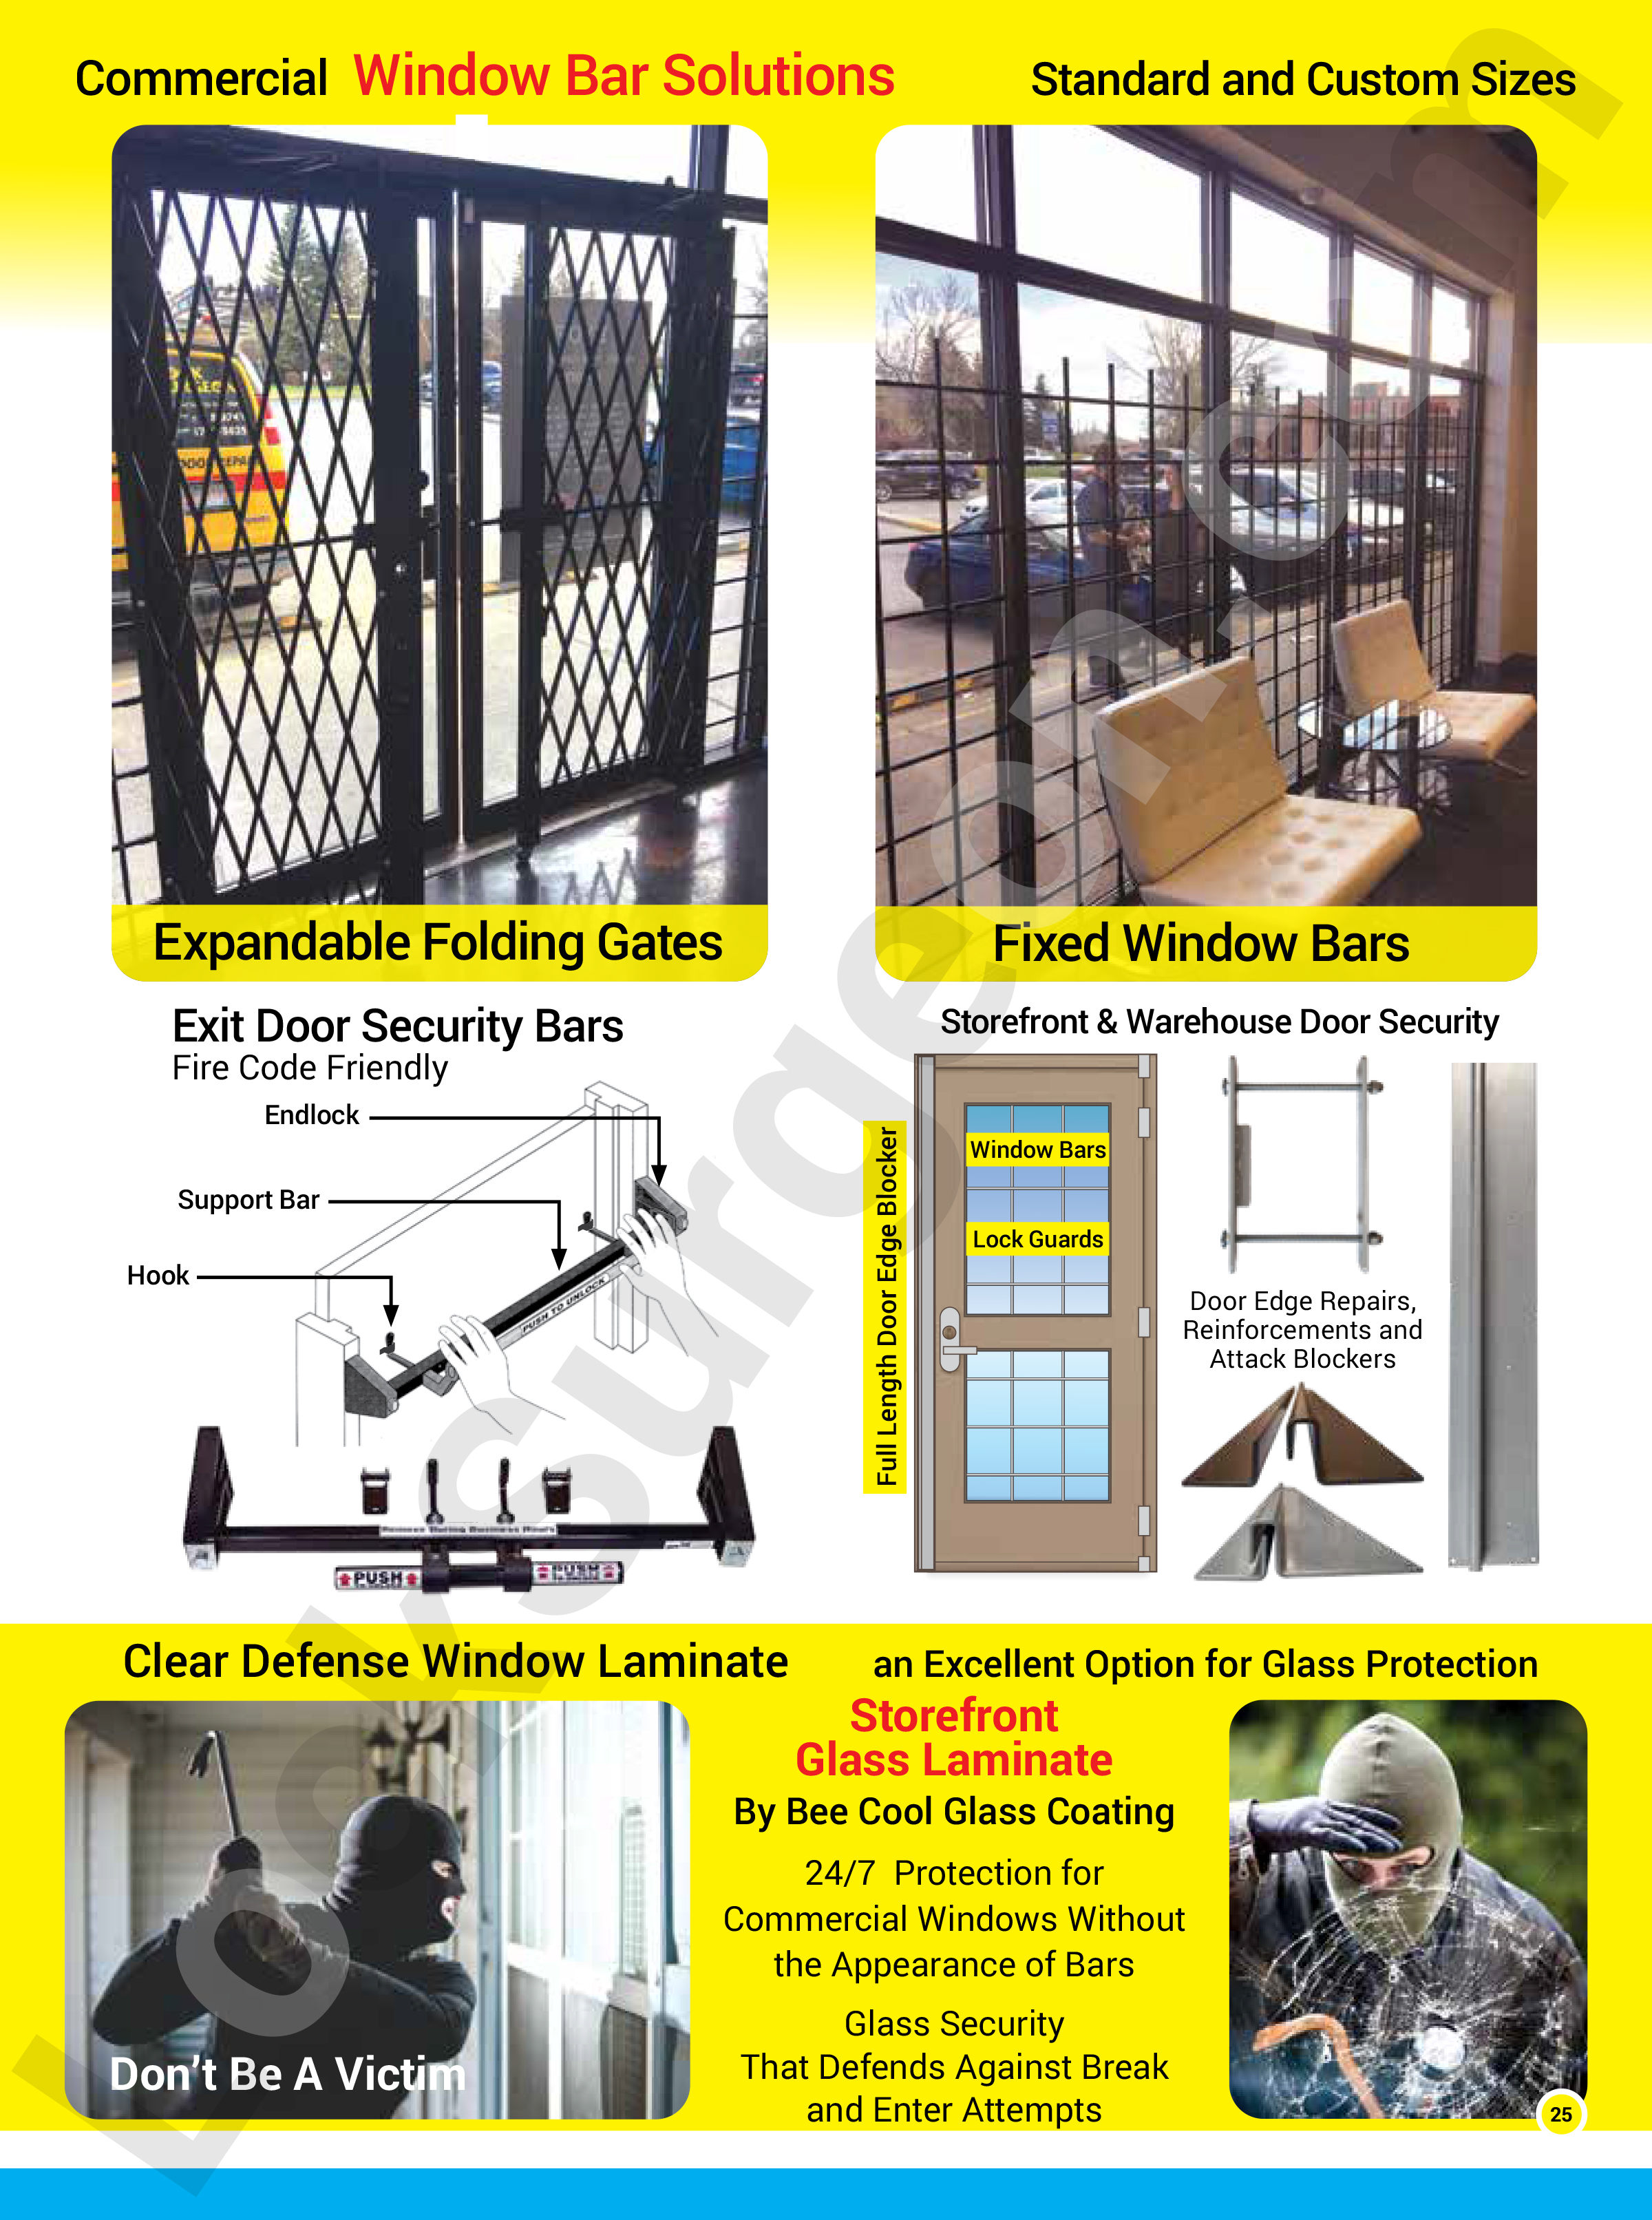 Commercial window bar solutions in standard and custom sizes. Storefront & warehouse door security.